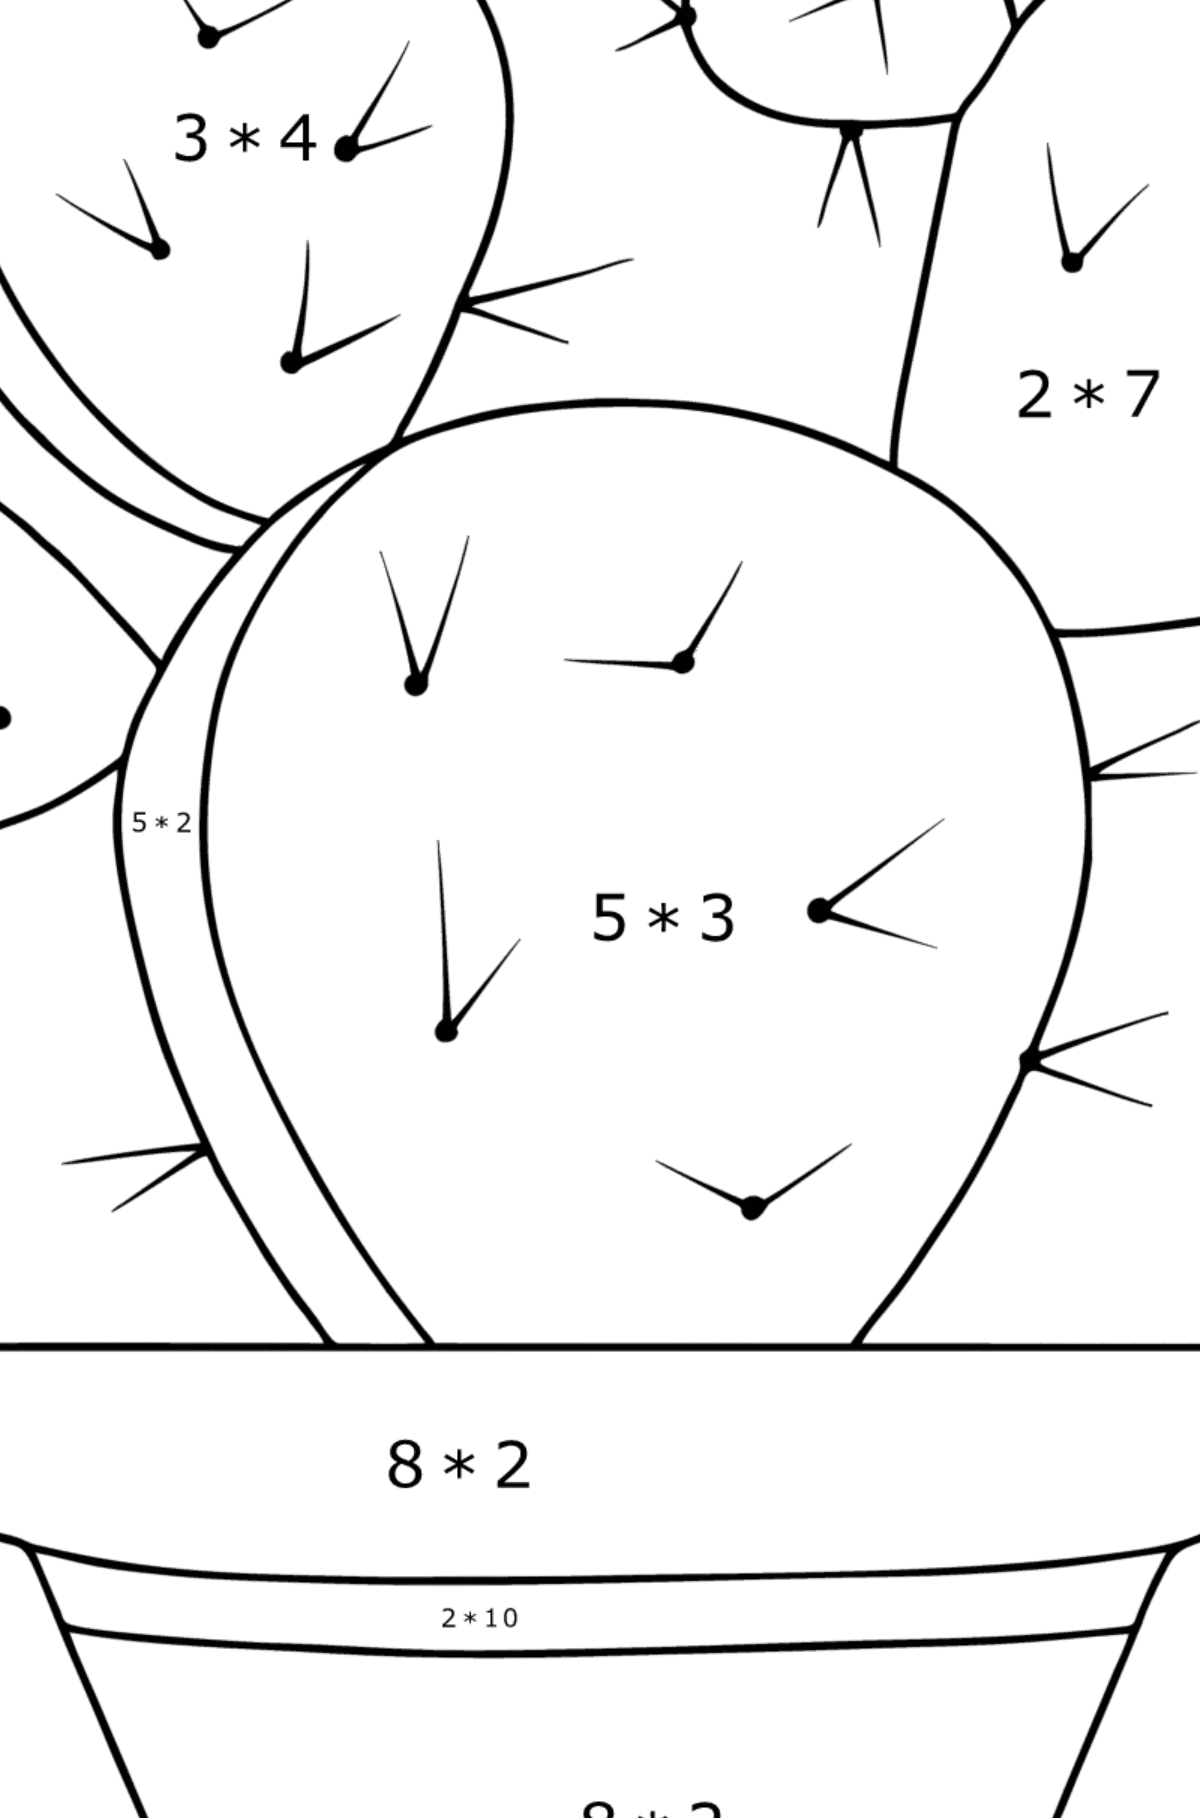 Prickly pear Cactus coloring page - Math Coloring - Multiplication for Kids